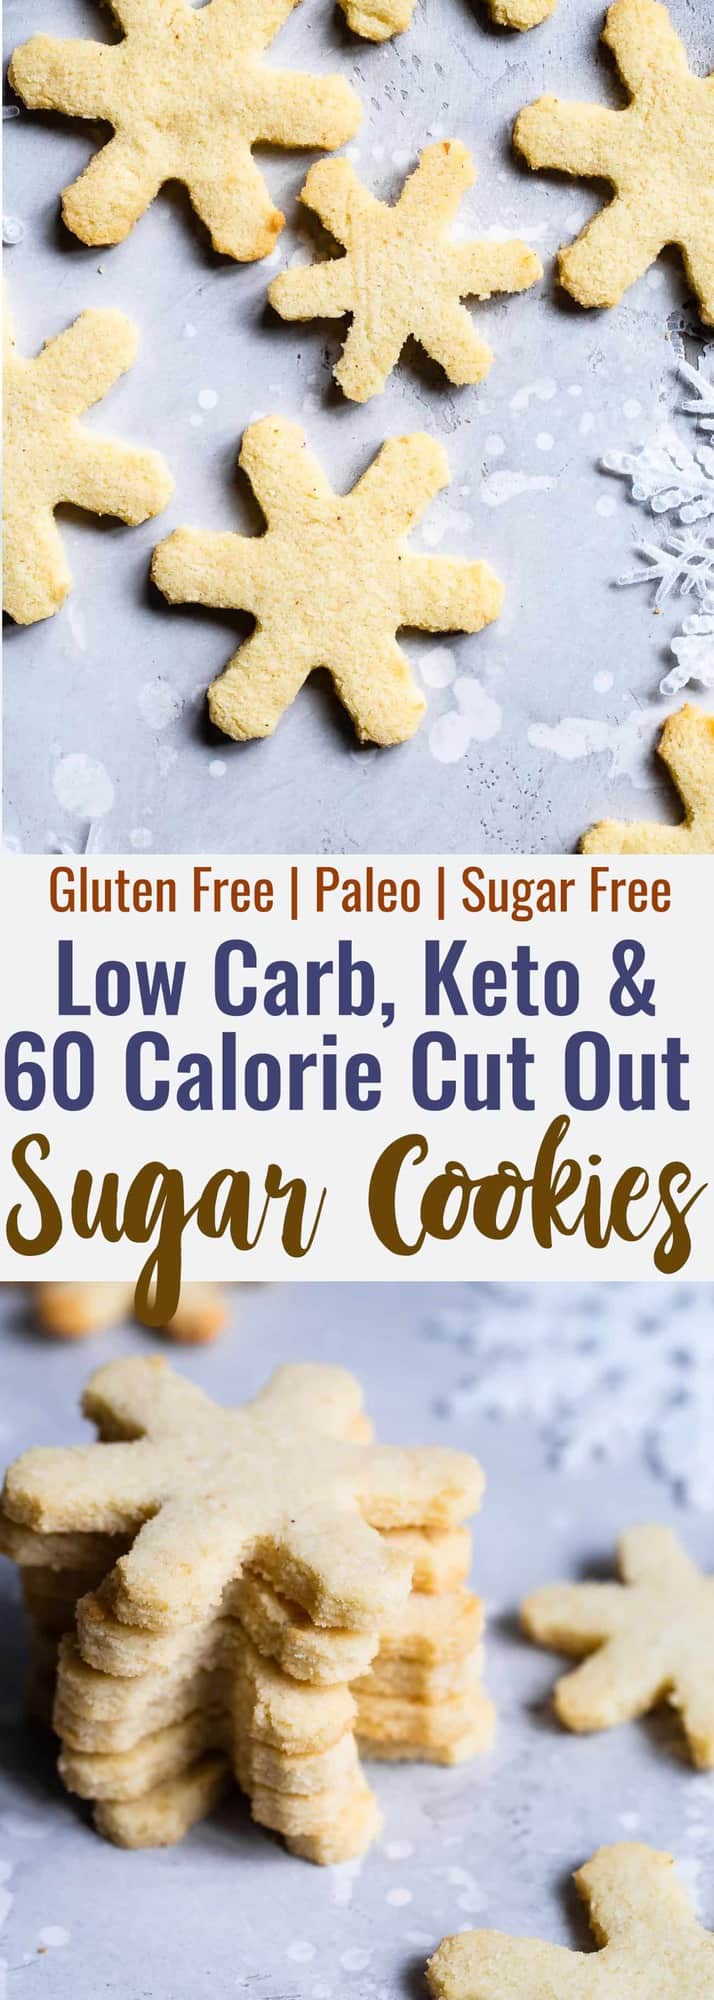 Low Carb Keto Sugar Cookies - These Sugar Free Sugar Cookies actually hold their shape and are so easy to make! No one will know they're only 60 calories and gluten/grain/sugar free! | #Foodfaithfitness | #Lowcarb #Keto #Glutenfree #Grainfree #Paleo